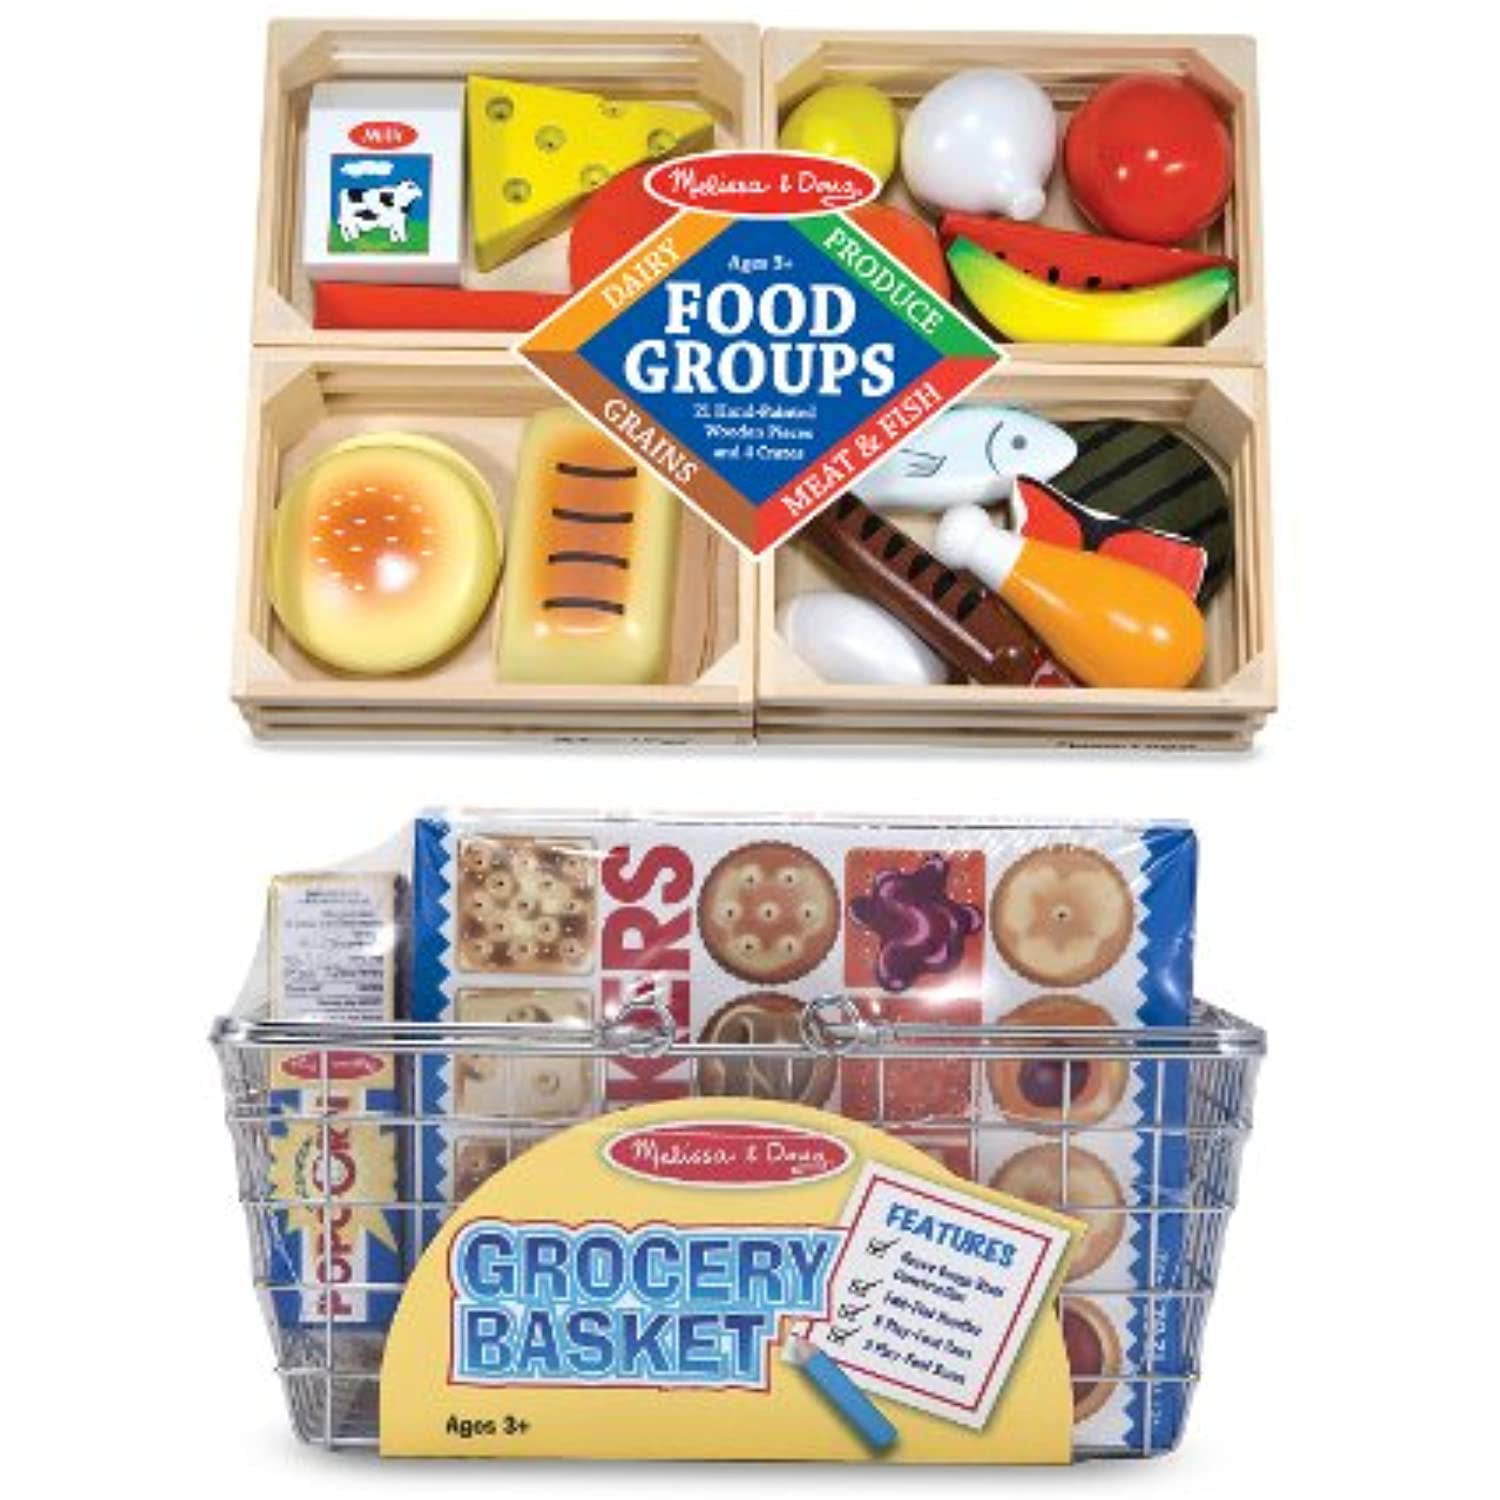 5171 Grocery Basket Kitchen Play Toys by Melissa & Doug 